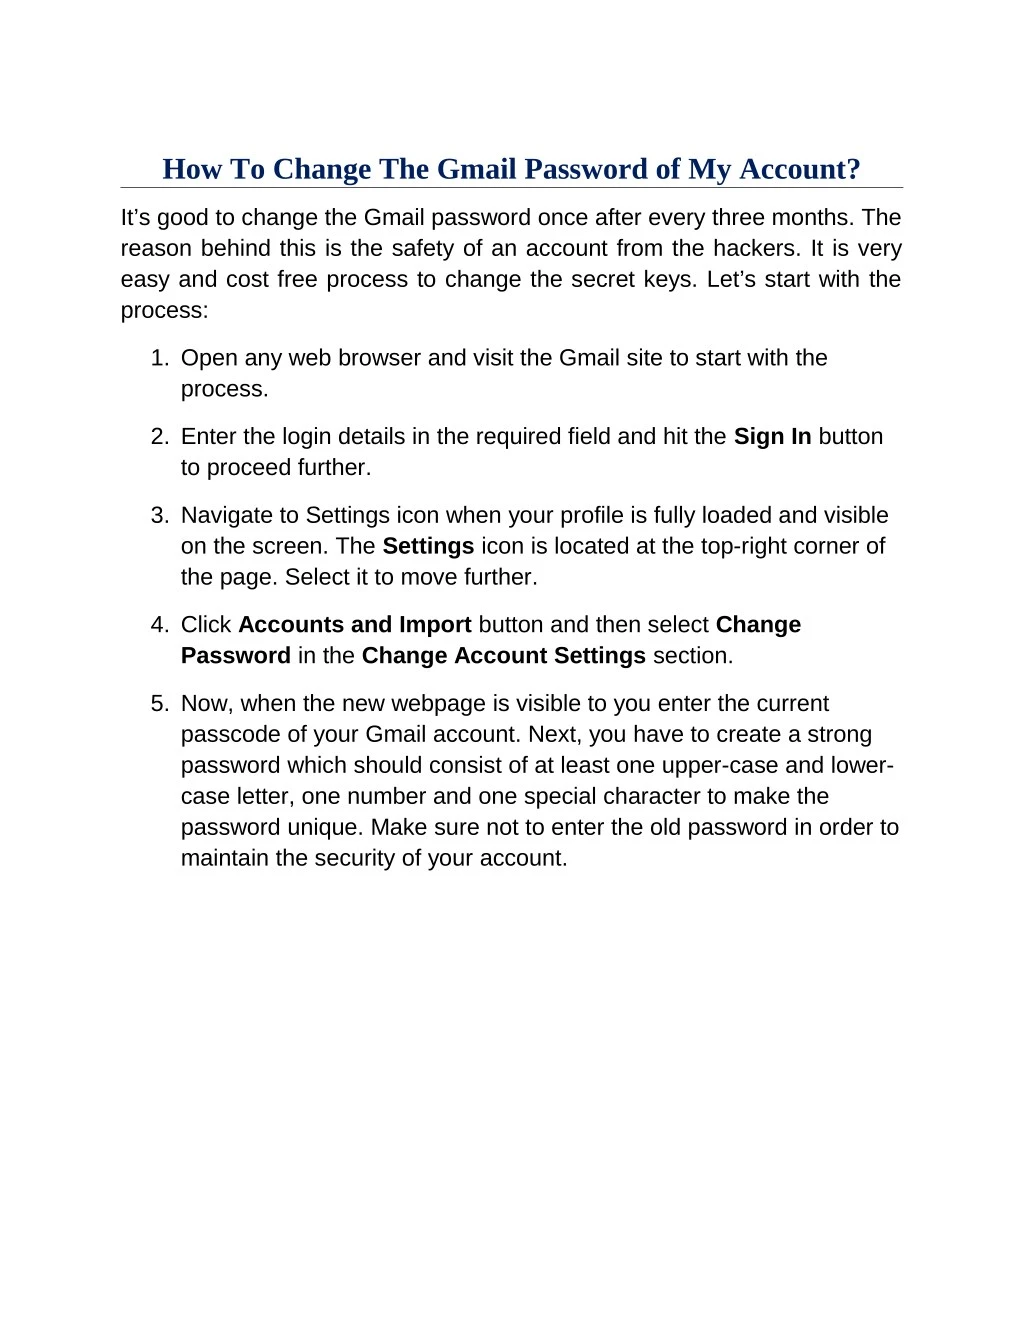 how to change the gmail password of my account